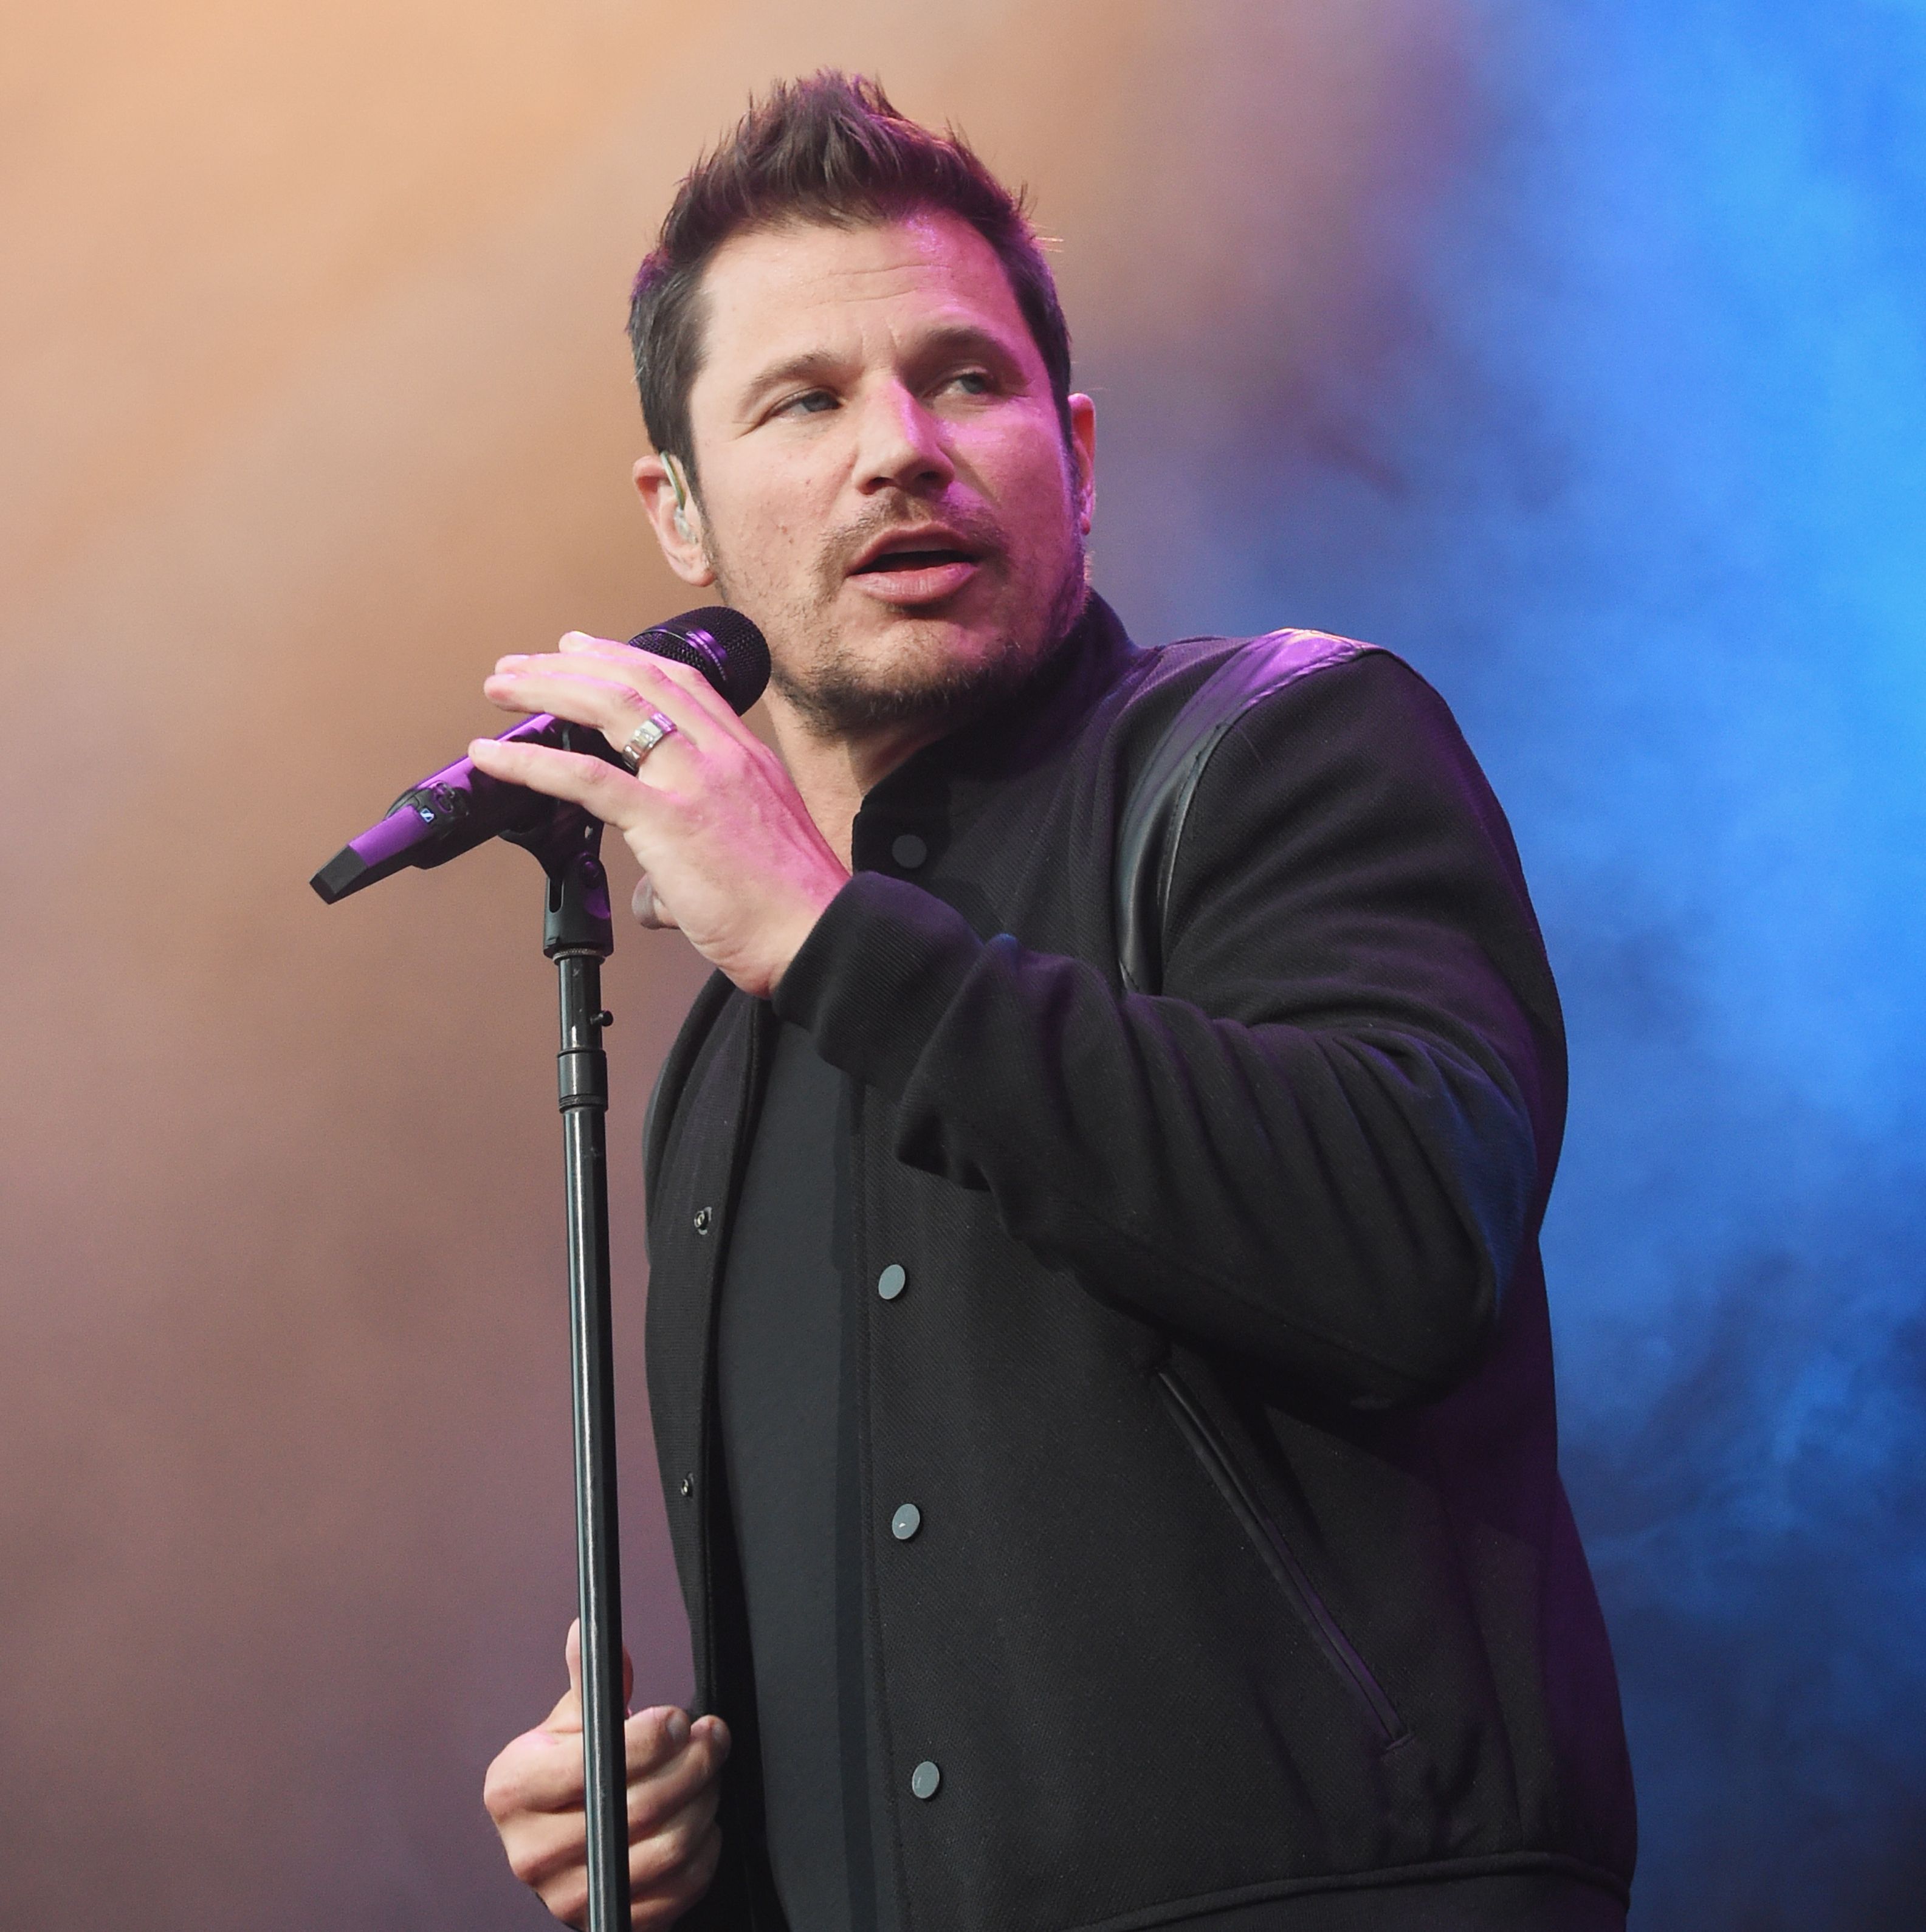 'Love Is Blind' Fans Are Mad at Nick Lachey for Dissing Jessica Simpson